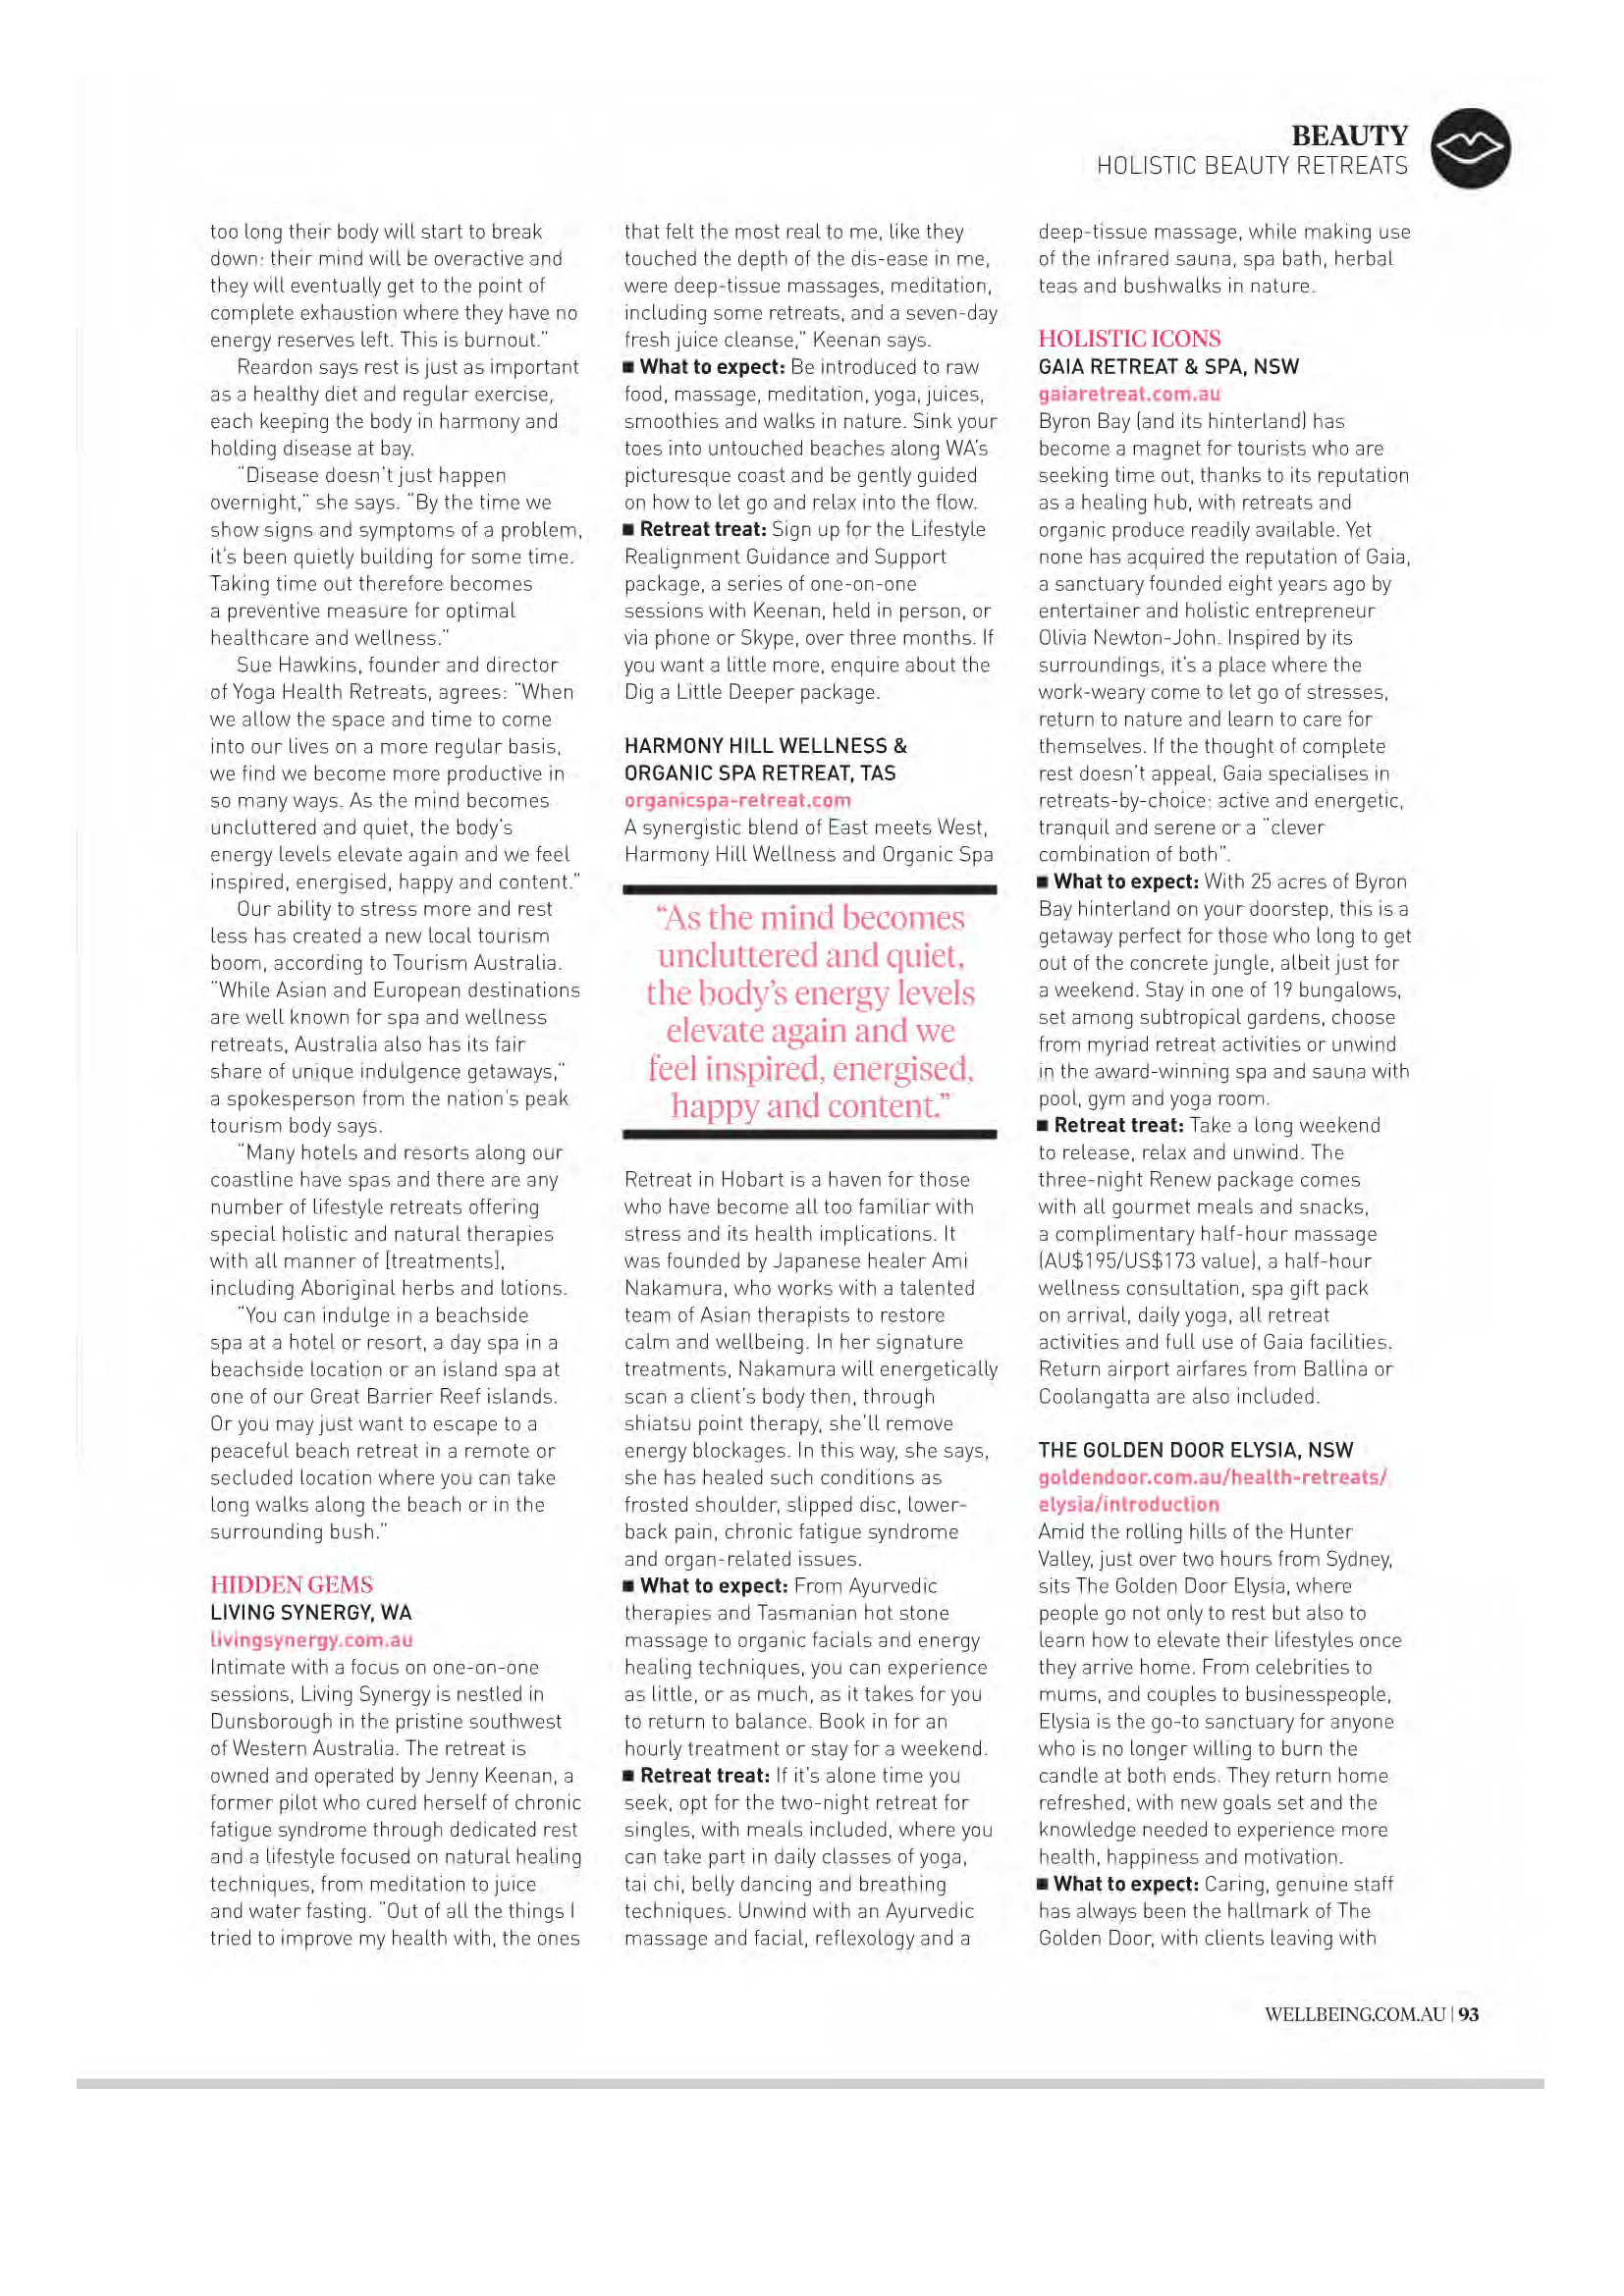 Wellbeing Article_Page_2